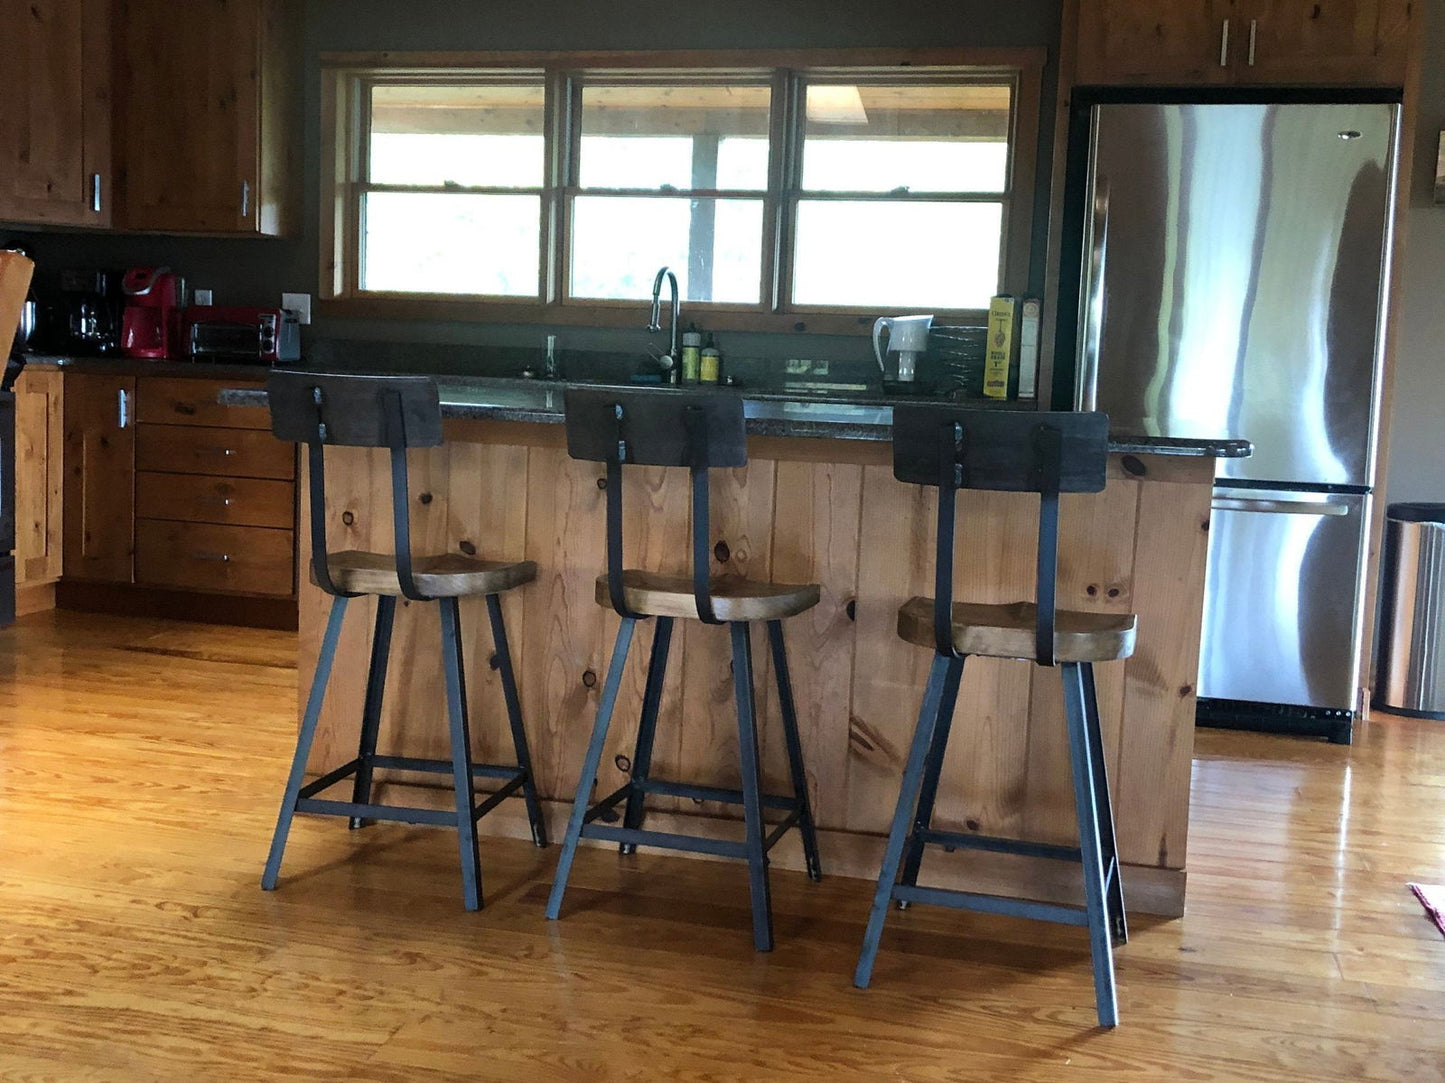 Bar Stools With Backs, Counter Stools, Scooped Seat Brew Haus, Counter Height Stools, Reclaimed Wood Bar Stools, Modern Farmhouse Bar Stools - Mac & Mabel